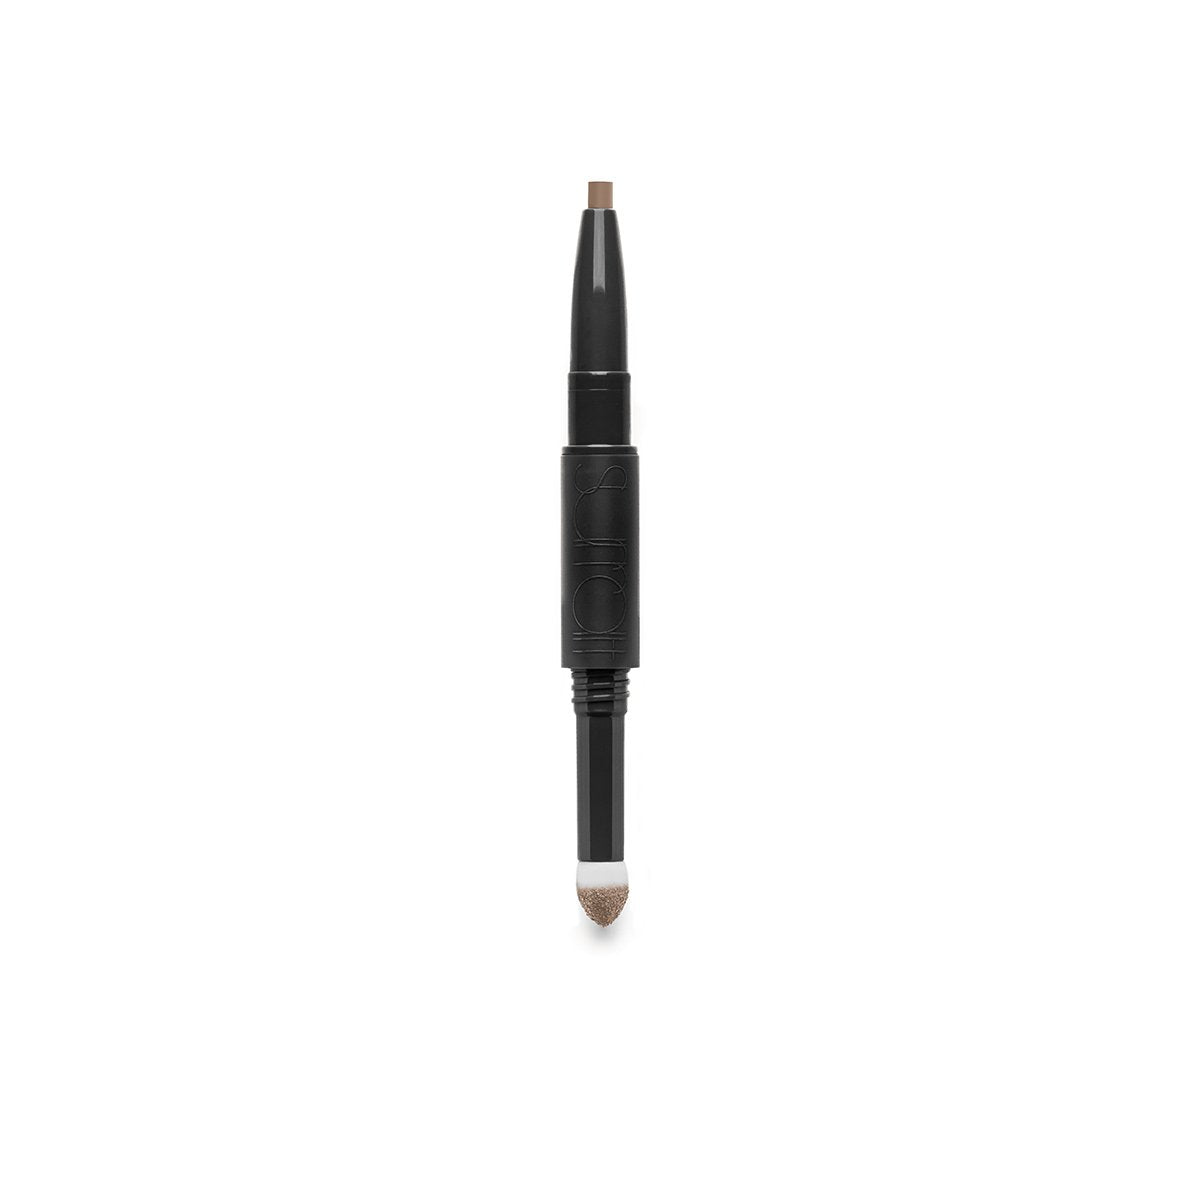 CENDRES - ASHY TAUPE - dual-ended eye baton with creamy eyeliner in ashy taupe and corresponding smoldering eyeshadow in ashy taupe shade